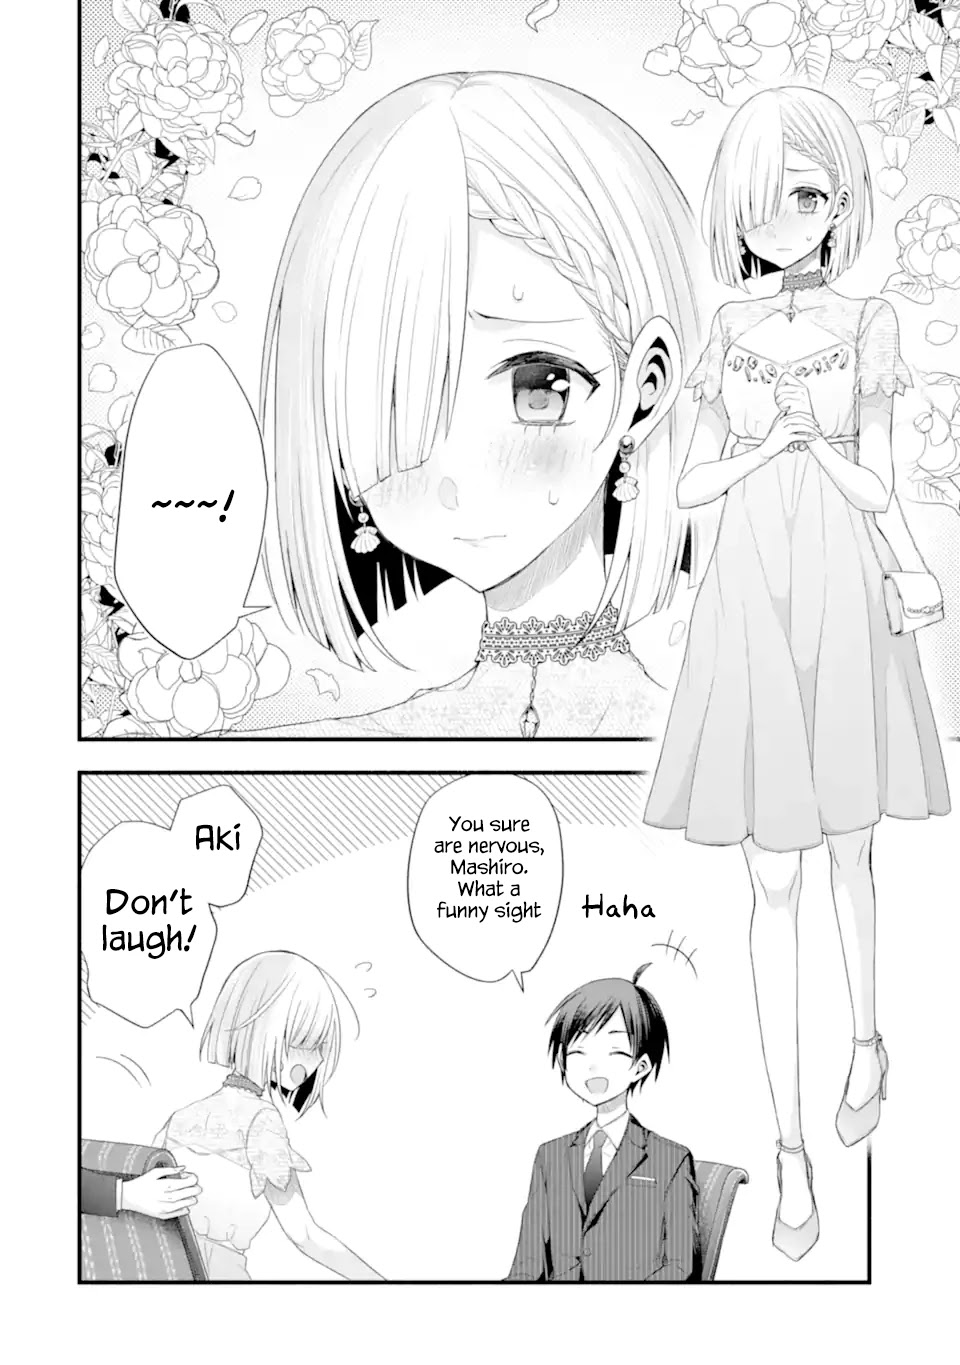 My Friend's Little Sister Is Only Annoying to Me - chapter 16 - #2